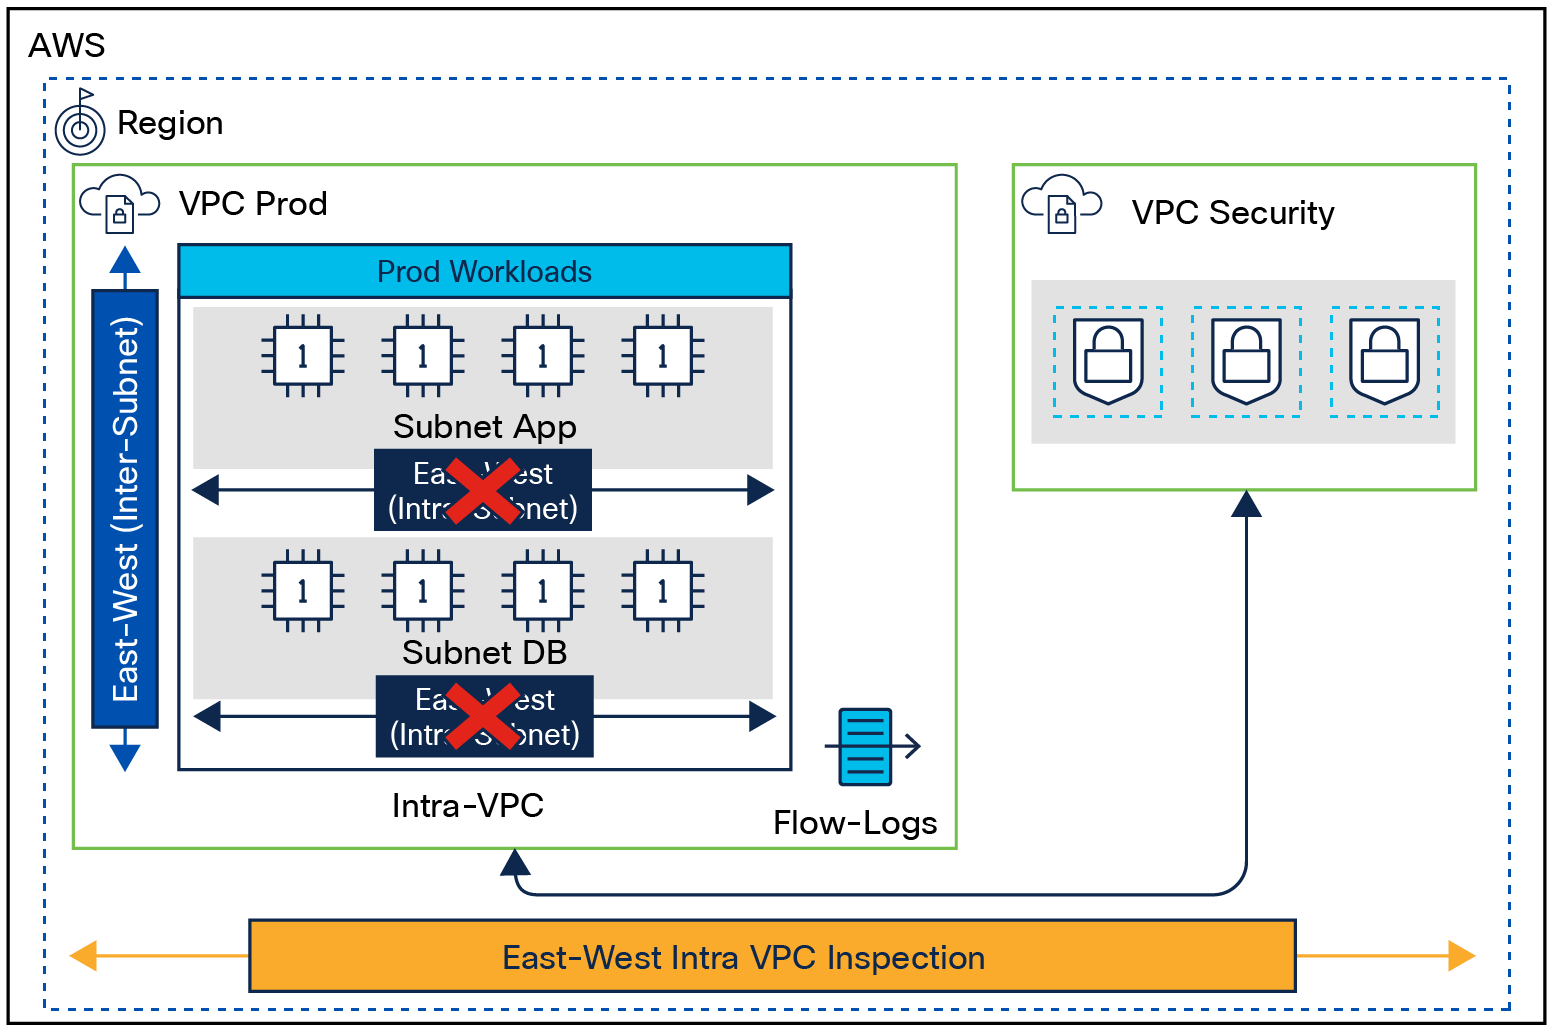 Network Microsegmentation for Cloud Agentless Workloads with Distributed VPC Secure Firewall Deployment on AWS